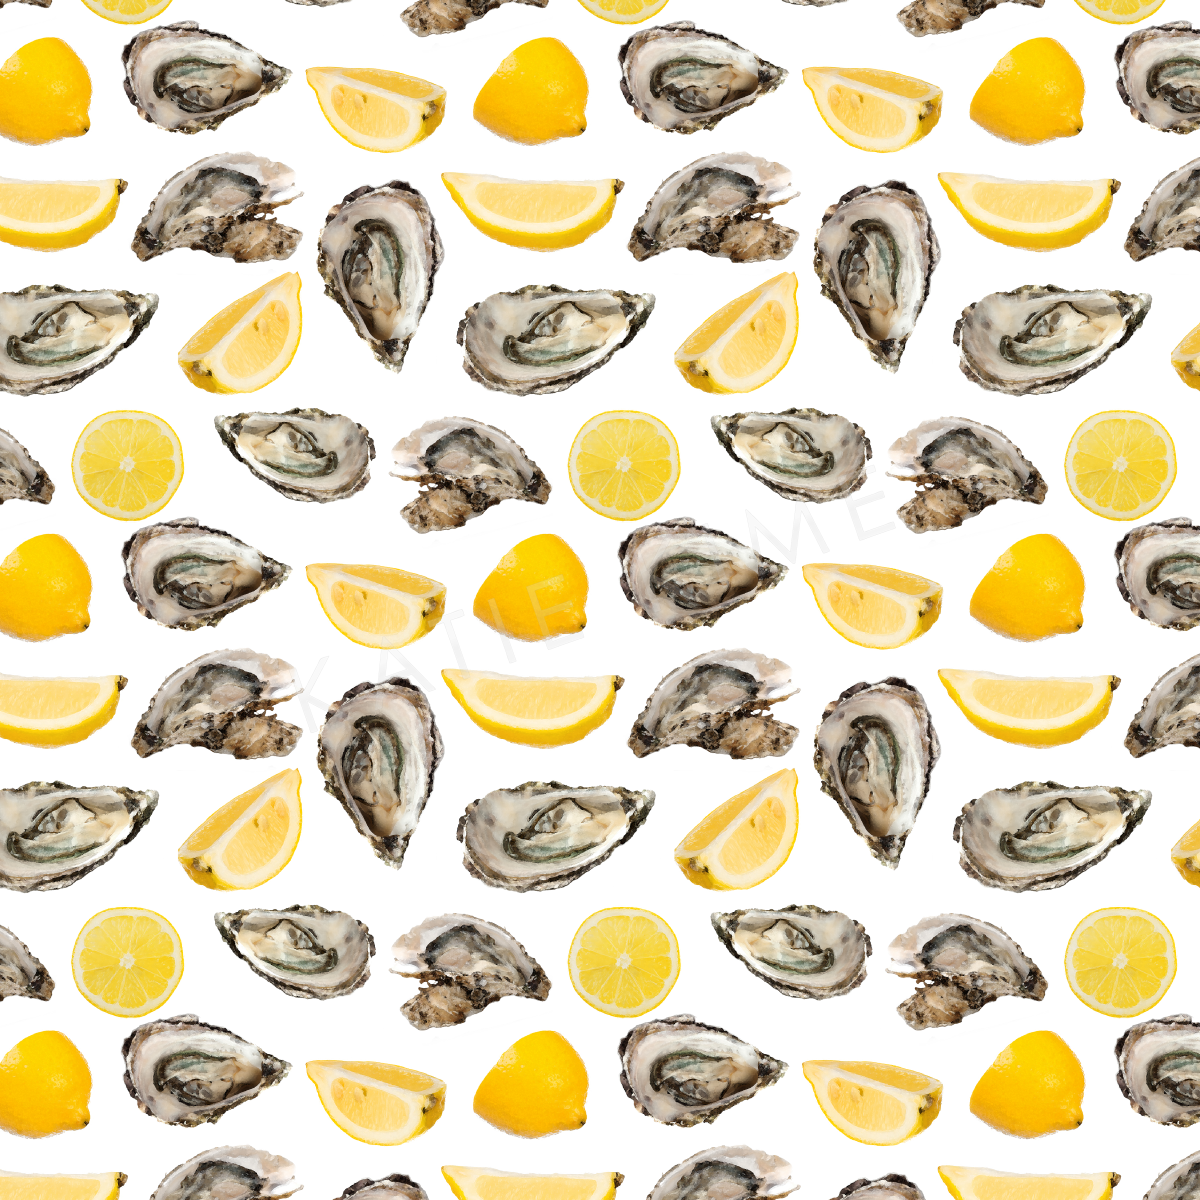 Peel & Stick Wallpaper The World is Your Oyster Peel & Stick Wallpaper Katie Kime Design